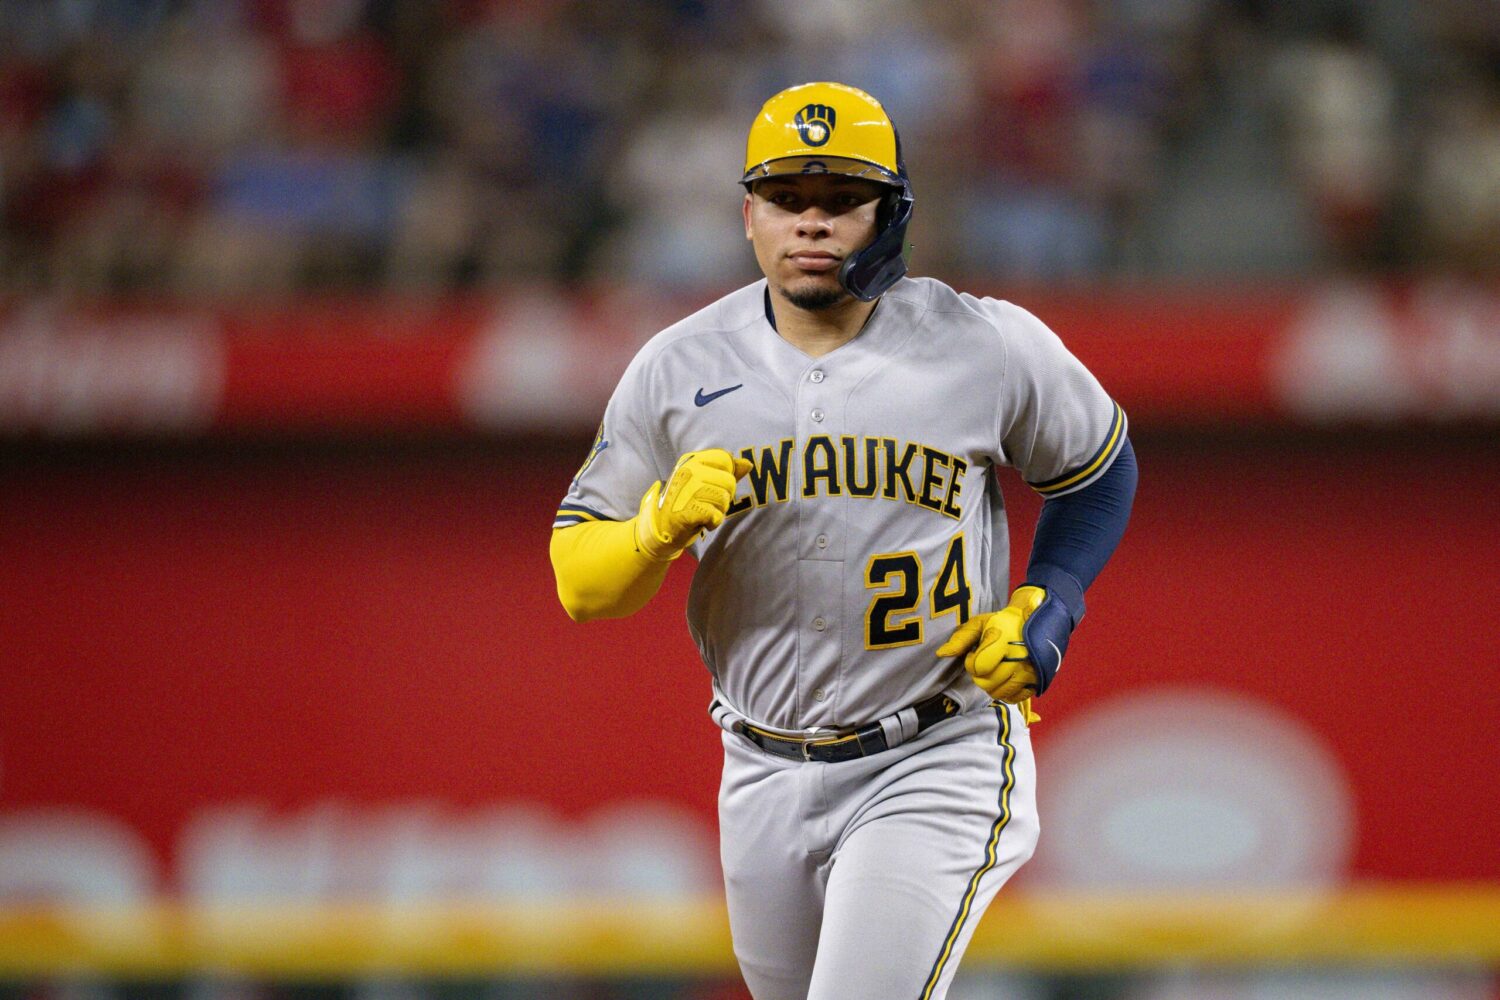 Milwaukee Brewers: William Contreras Gives Brutally Honest Take On